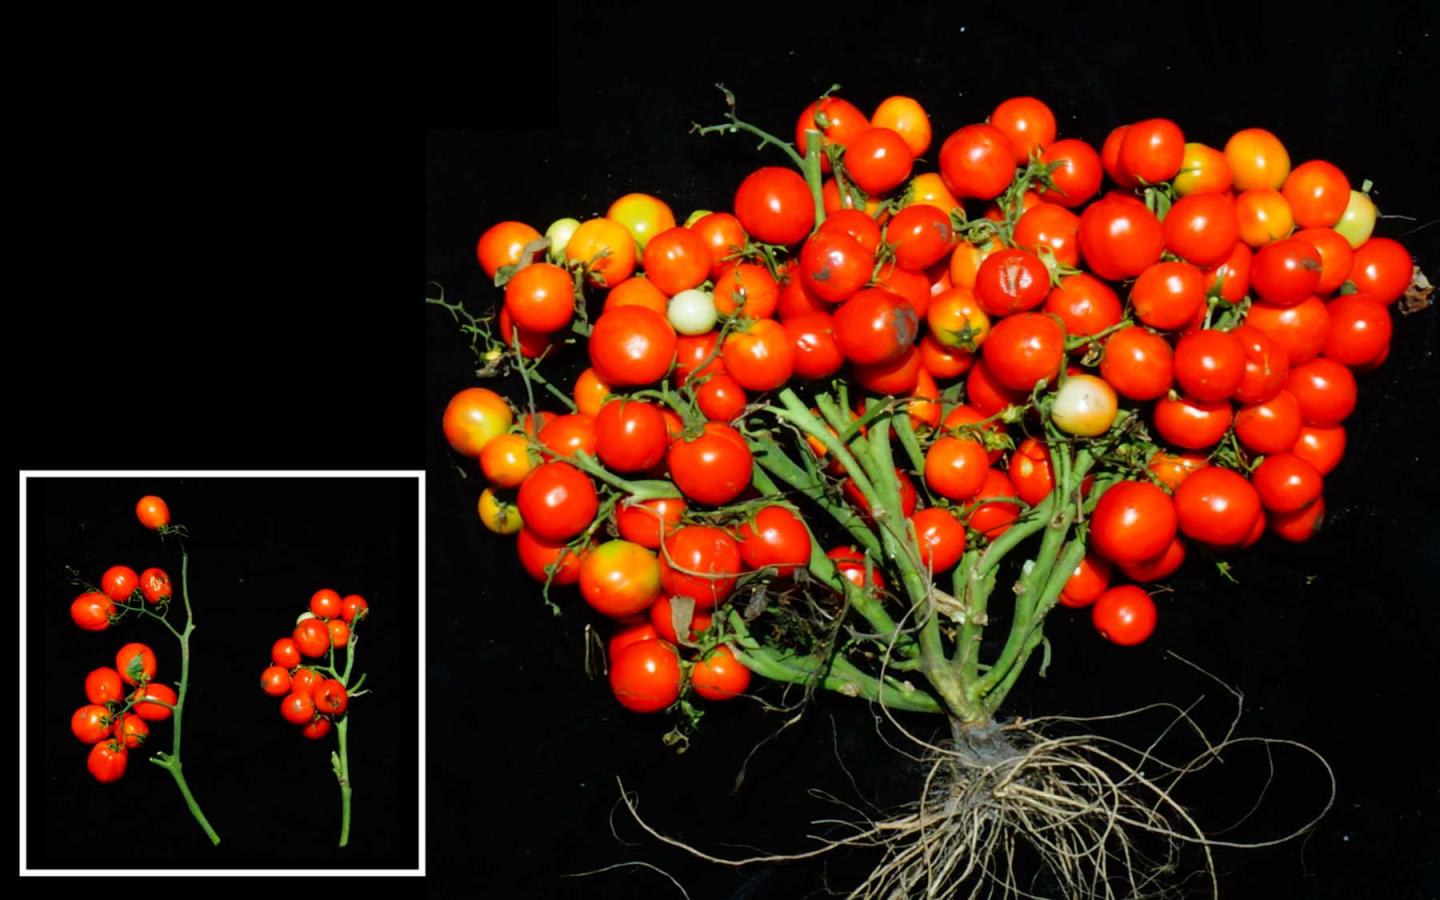 These gene-edited tomatoes grow in cute little bouquets suited to urban farming